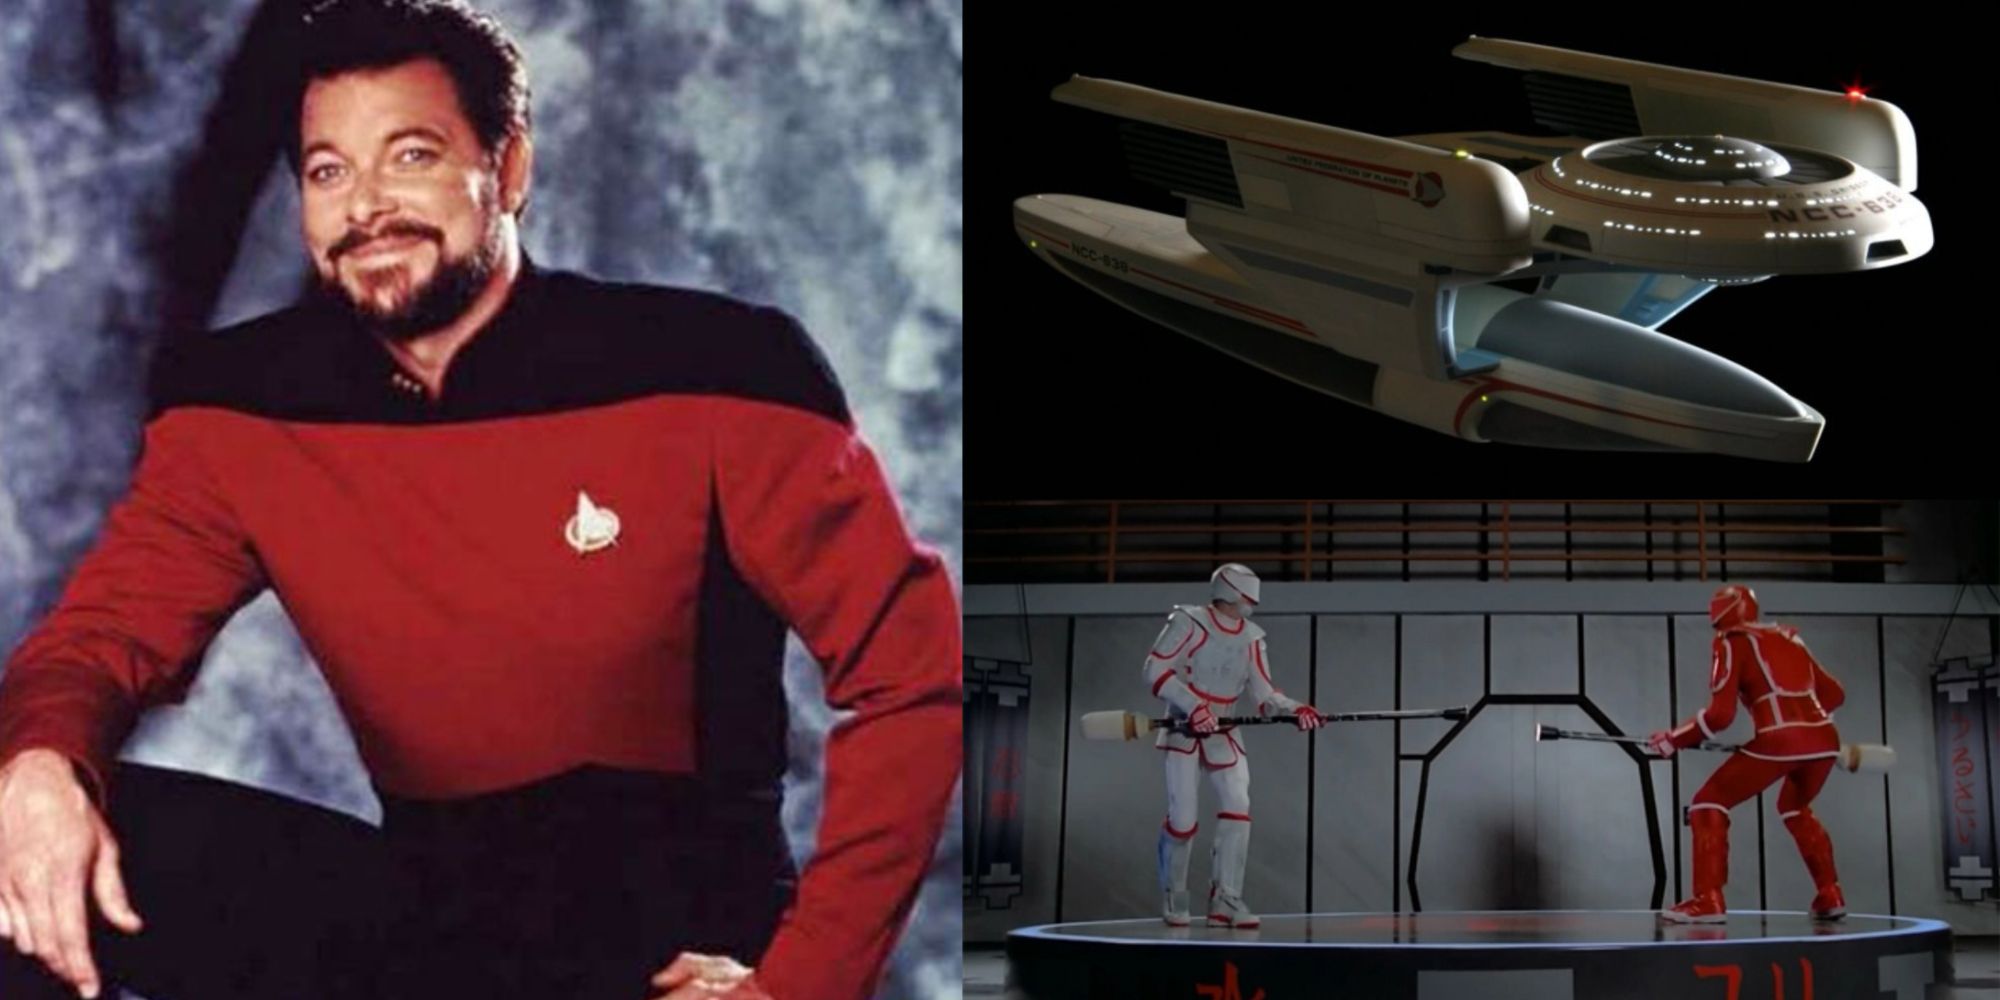 title image obscure facts about riker star trek